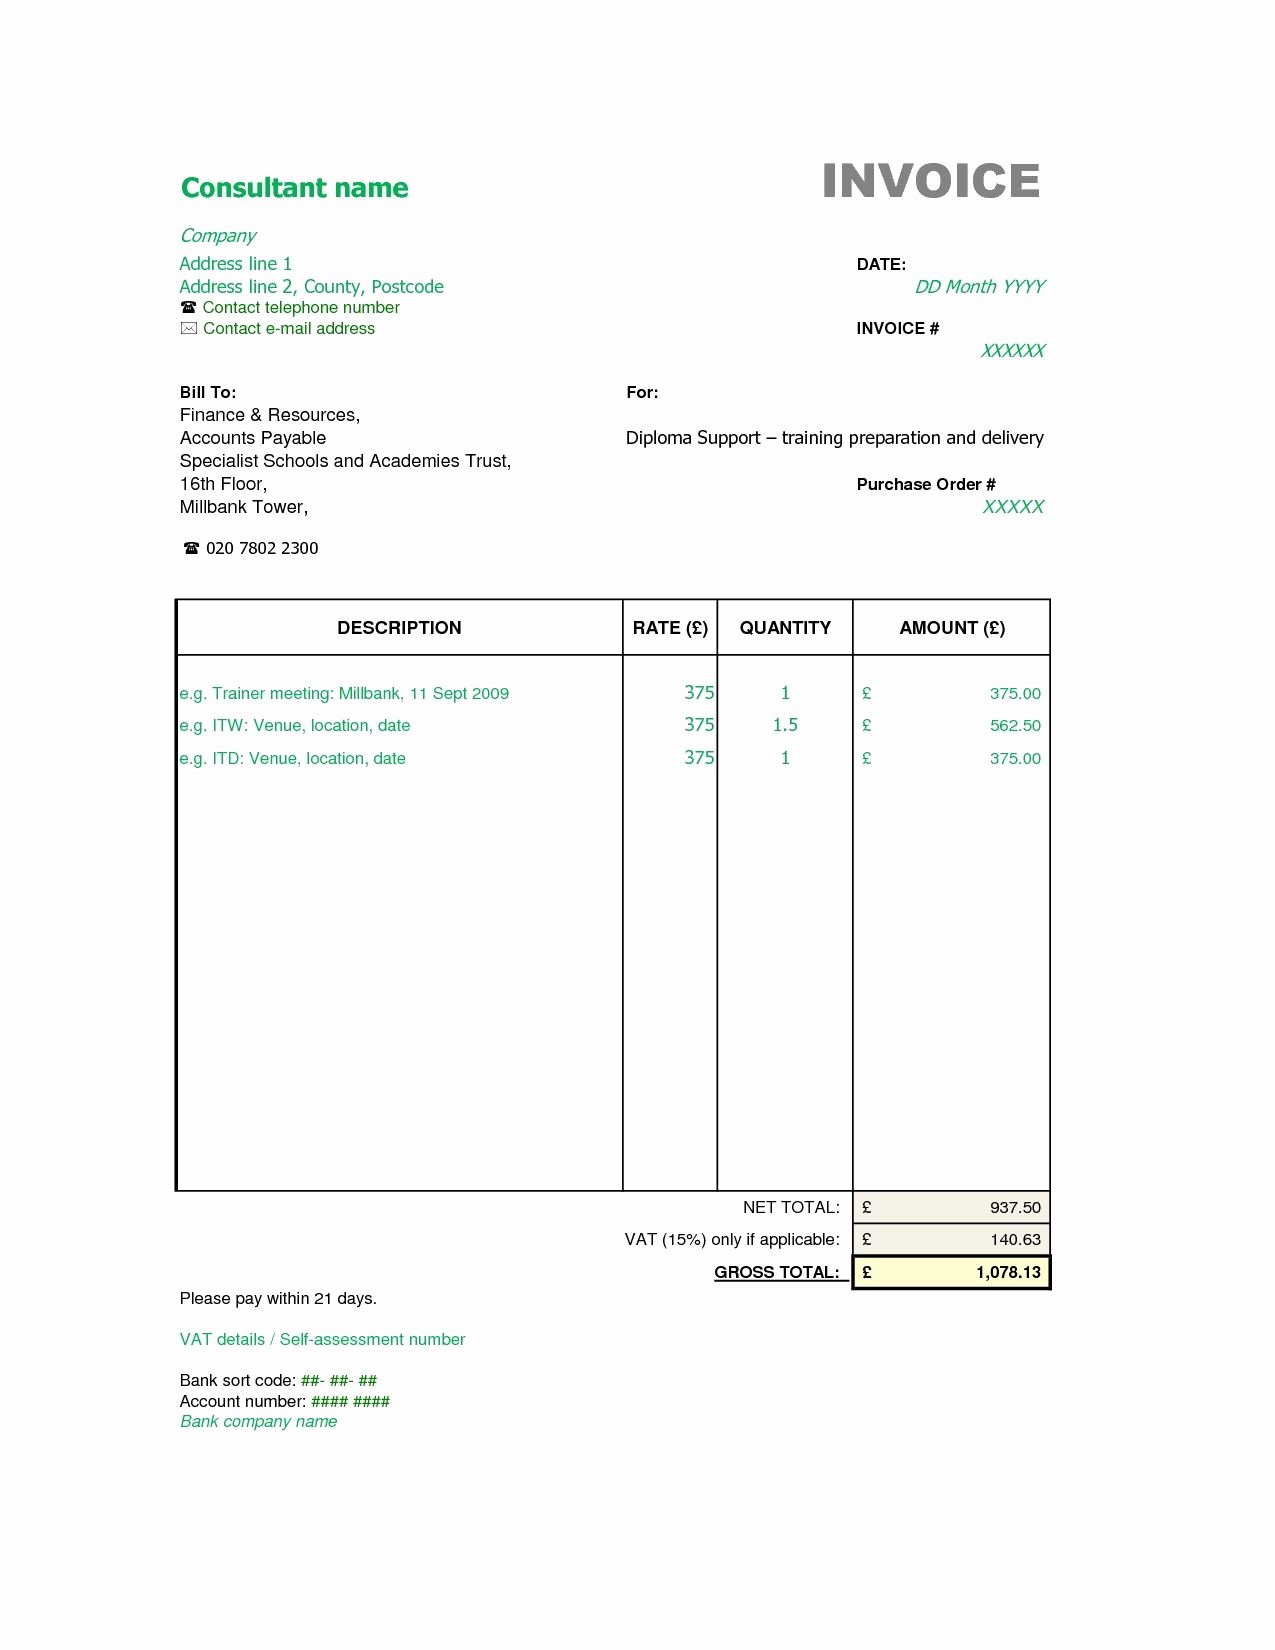 Invoice Template for Consulting Services Awesome Sample Consultant Invoice Excel Based Consulting Invoice